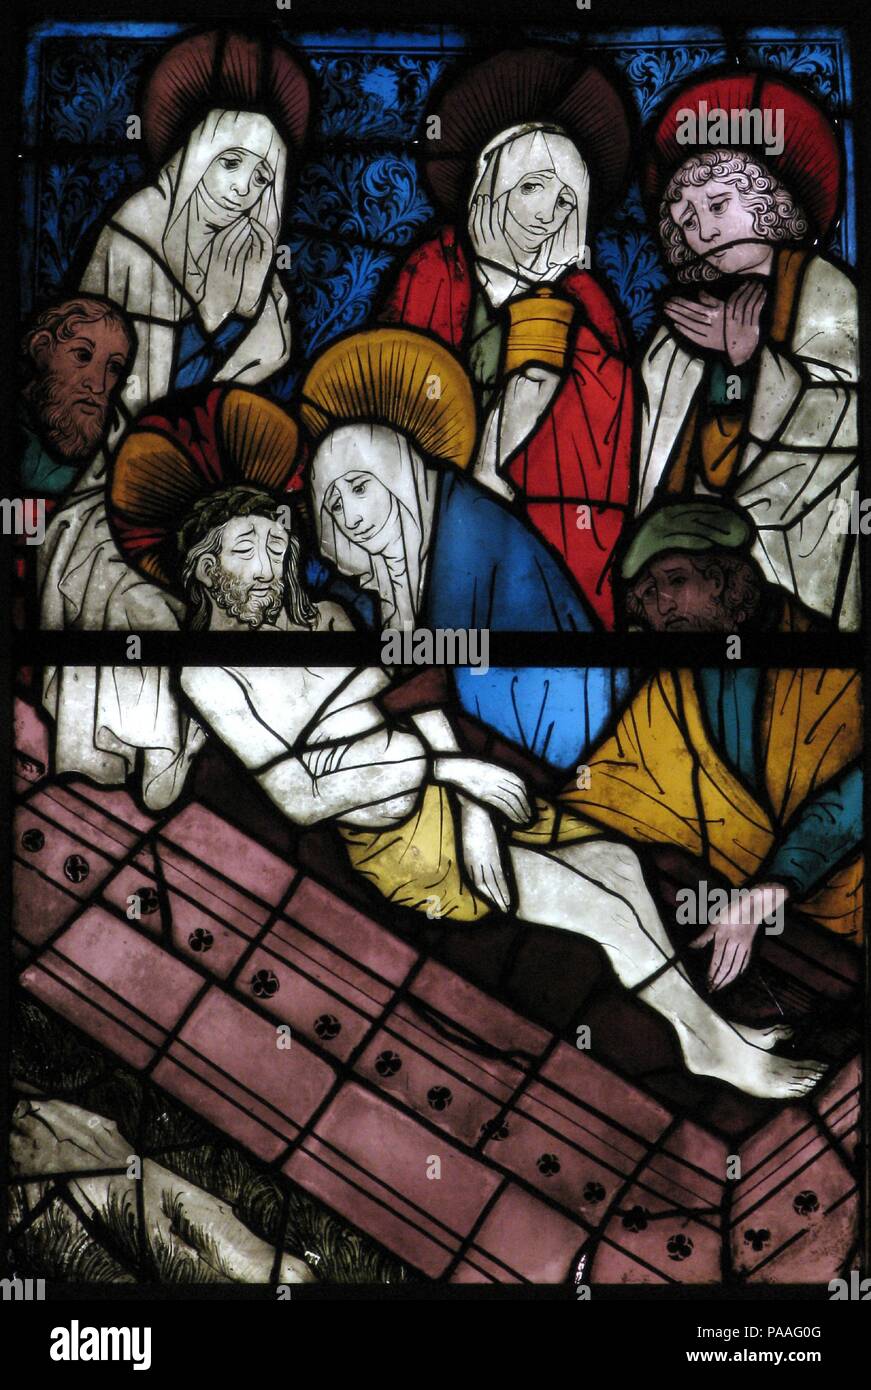 Stained Glass Panel with the Entombment. Culture: German. Dimensions: Overall (with 1 T-bar): 43 1/2 x 29 7/8 x 3/8 in. (110.5 x 75.9 x 1 cm)  Overall (installation opening): 41 3/4 x 28 3/8 in. (106 x 72.1 cm)  a: 21 13/16 x 29 3/8 x 3/8 in. (55.4 x 74.6 x 1 cm)  b: 21 9/16 x 29 1/8 x 3/8 in. (54.8 x 74 x 1 cm). Date: 15th century.  These panels were part of a window depicting the ancestry of Christ in the form of a Tree of Jesse (a complete example is shown opposite).  The painter of these windows adopted an angular style of drapery folds and subtle color juxtapositions initiating a new styl Stock Photo